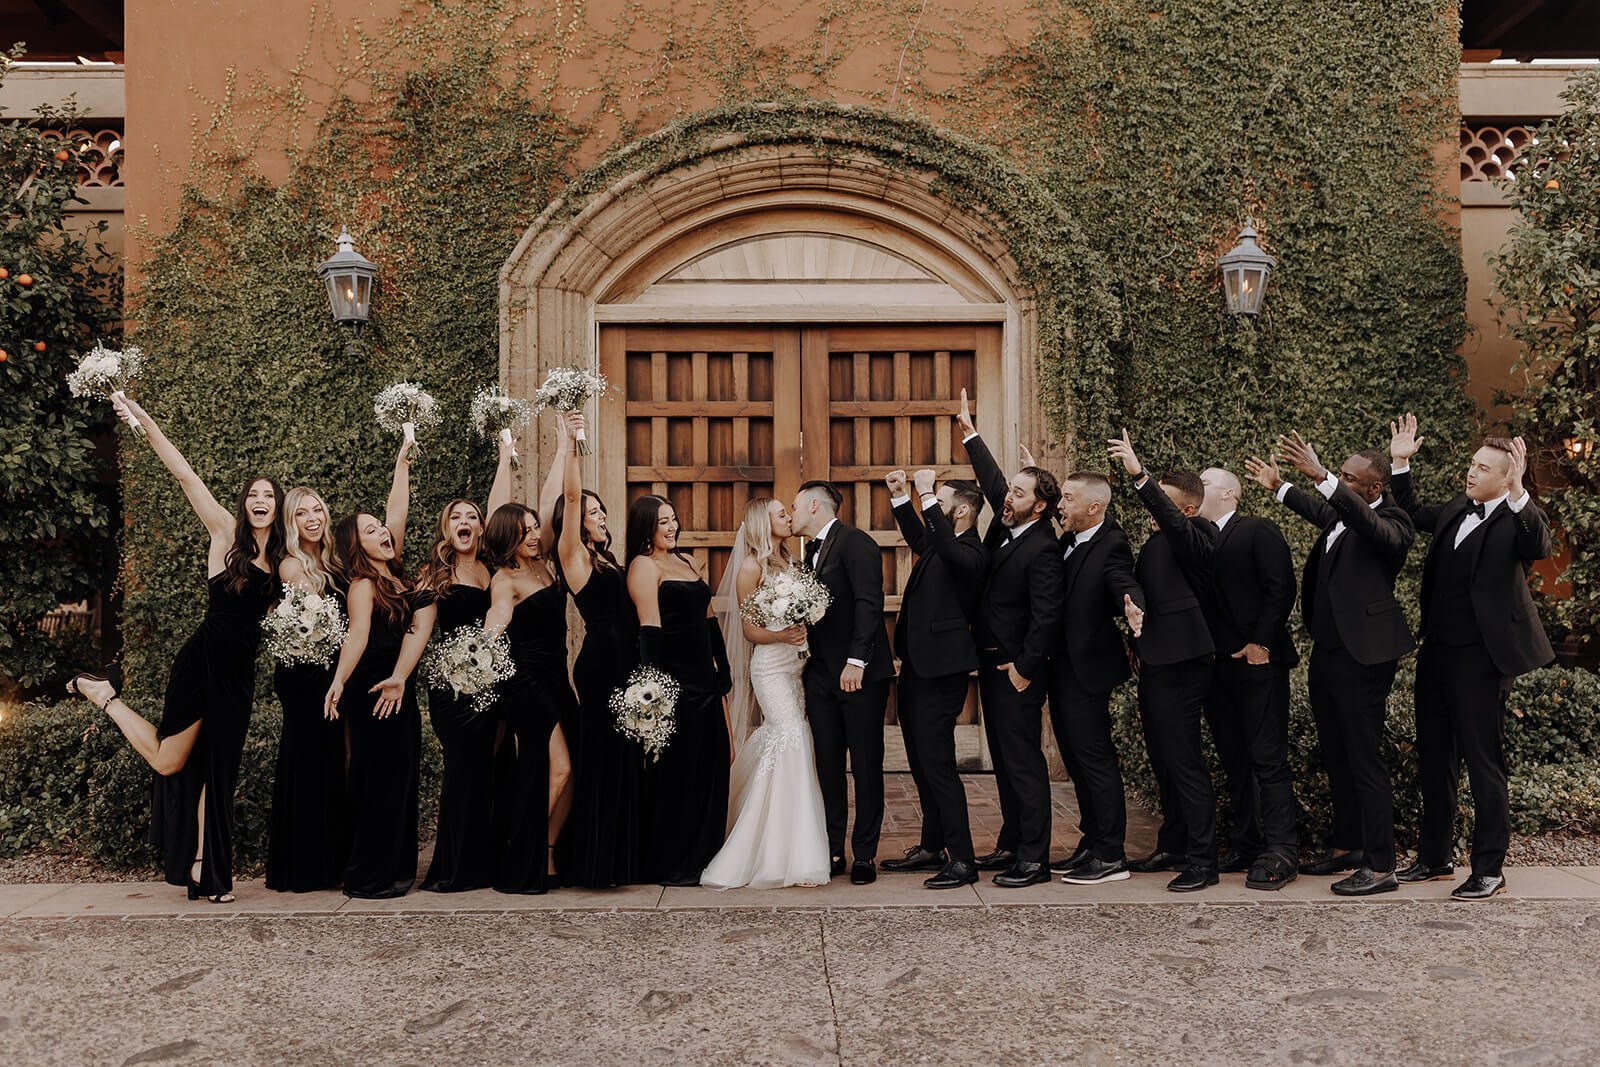 Wedding party celebrating with bride and groom at classy black and white Arizona wedding